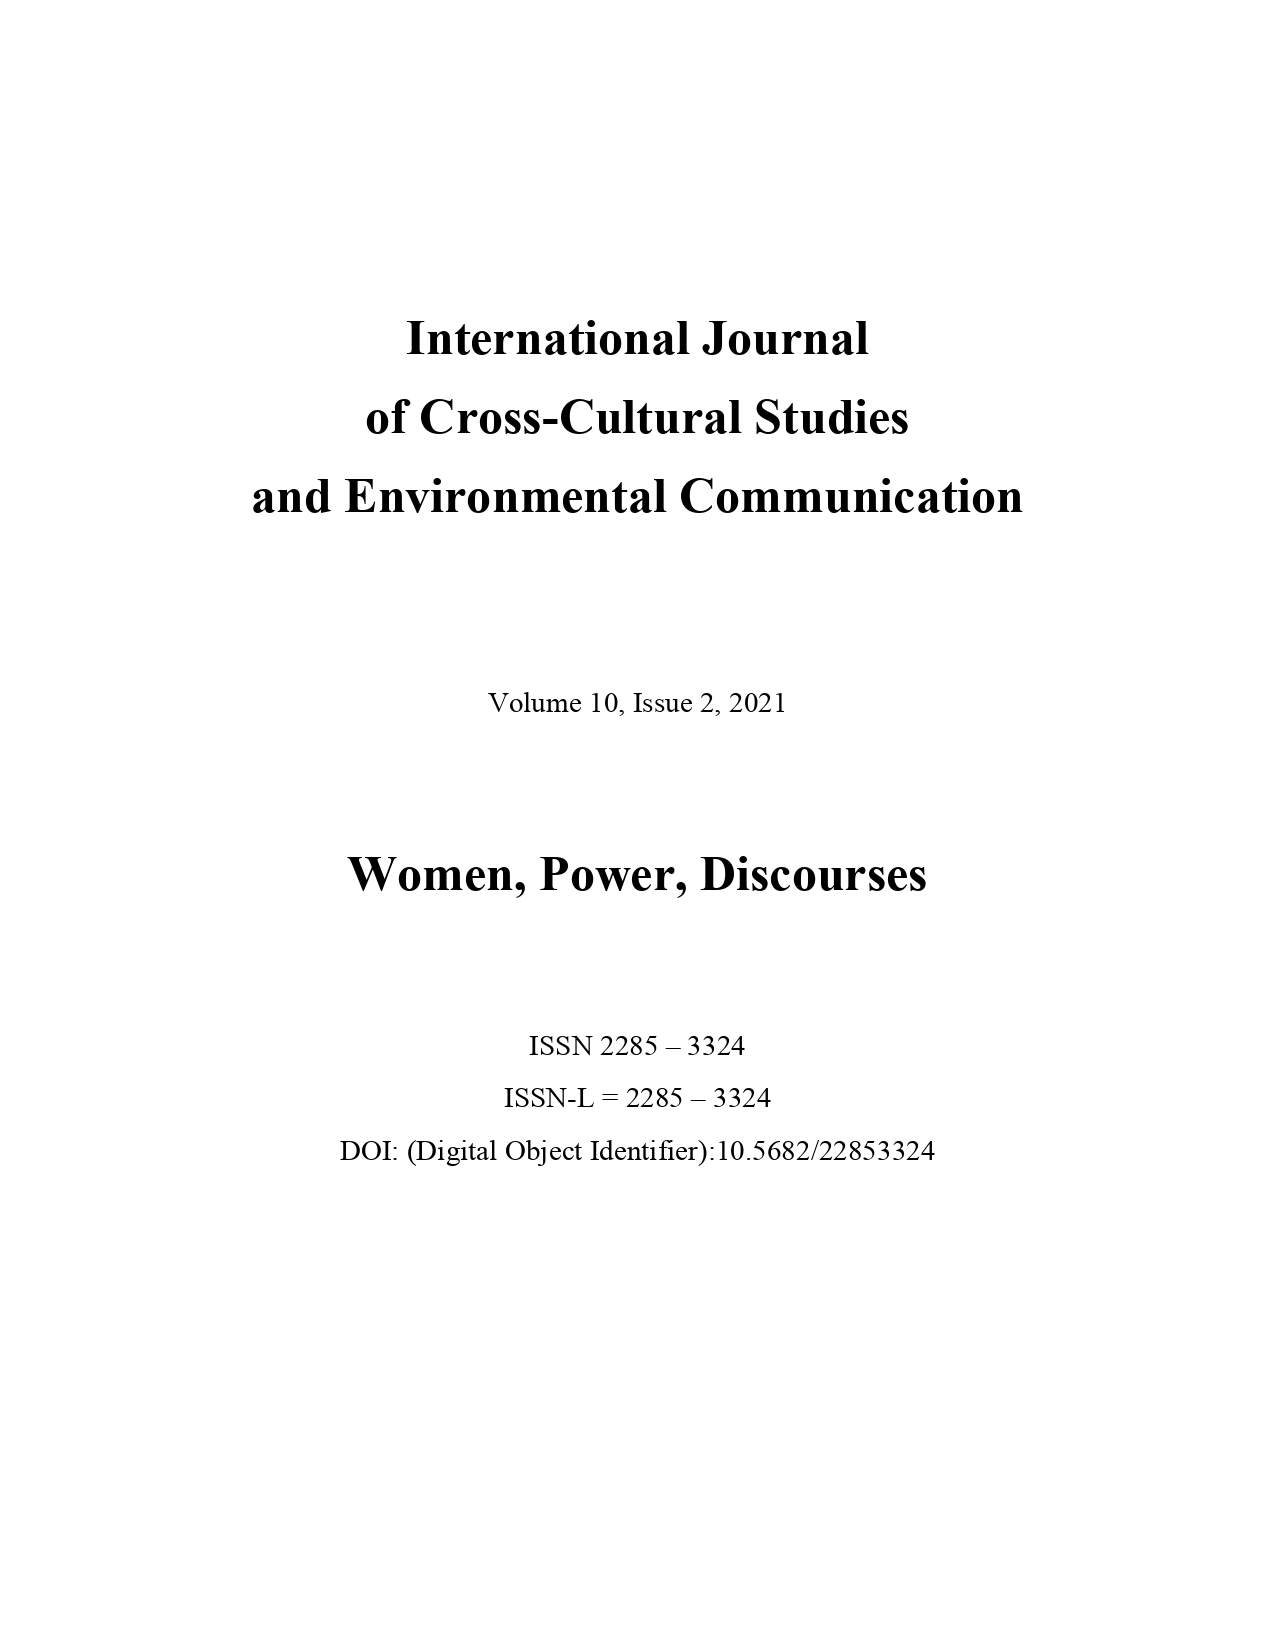 Introduction - Women, Power, Discourses Cover Image